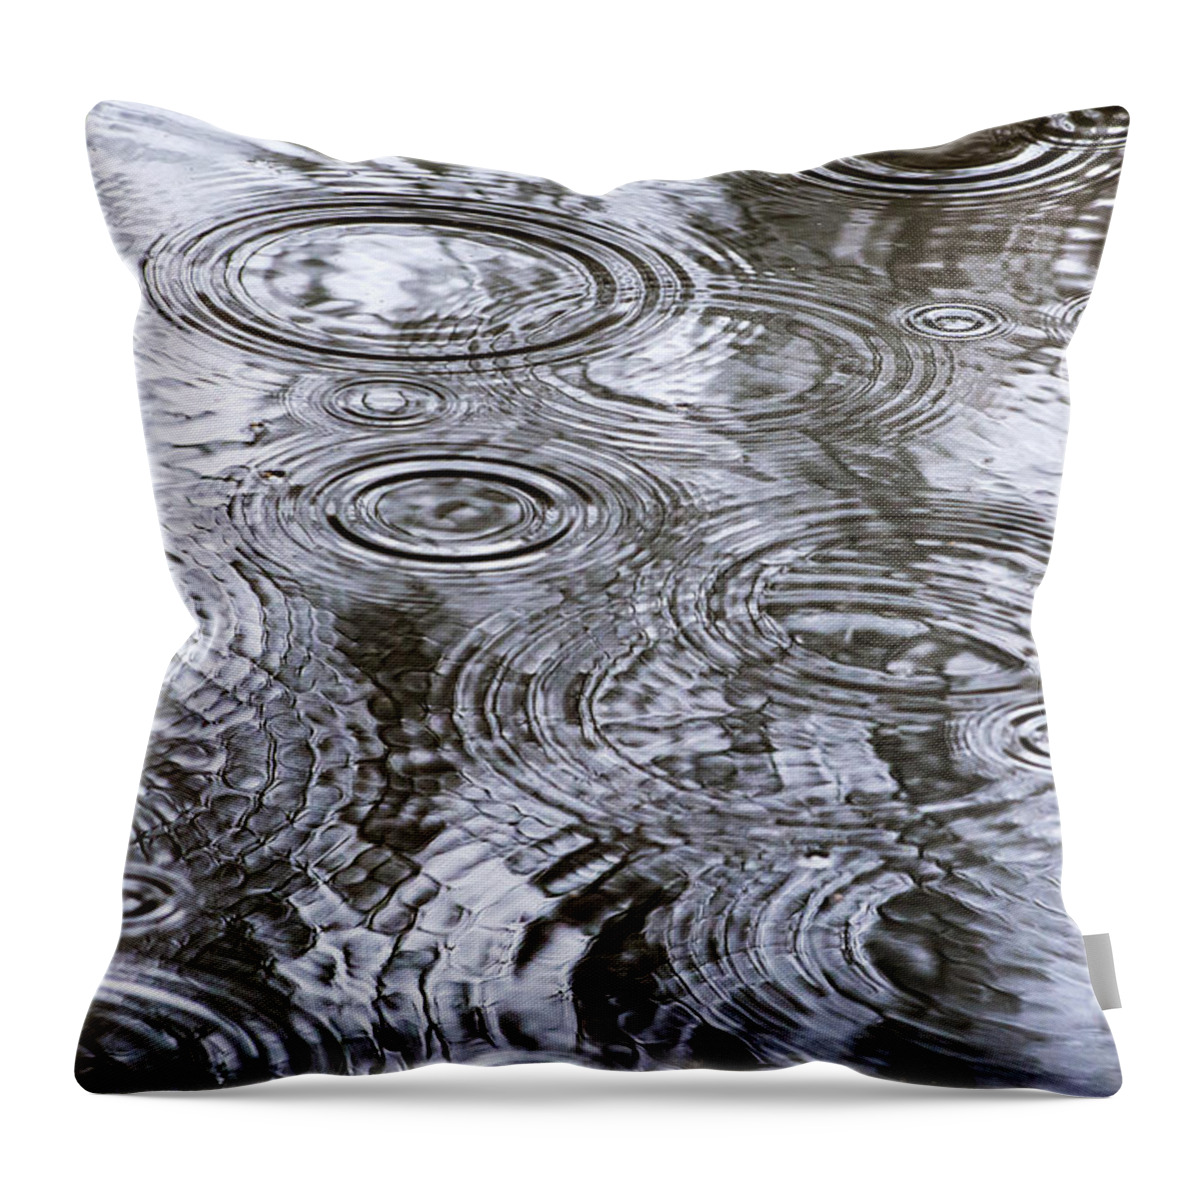 Water Throw Pillow featuring the photograph Abstract Raindrops by Christina Rollo